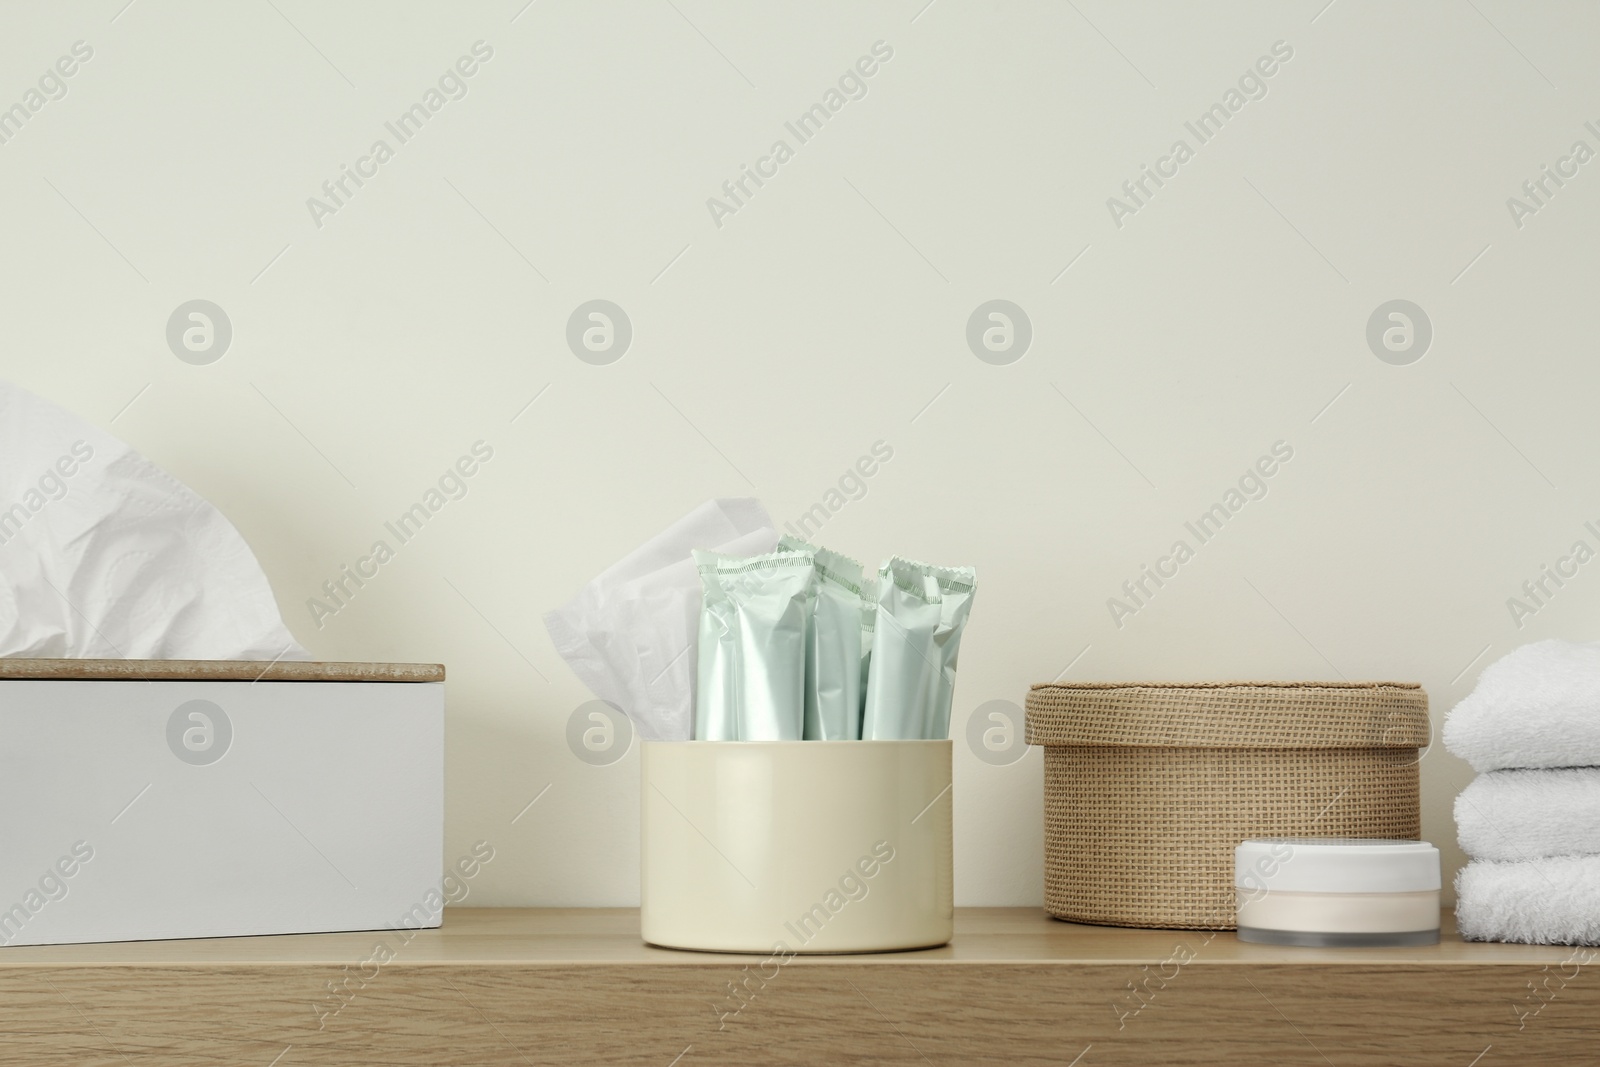 Photo of Different feminine and personal care products on wooden shelf